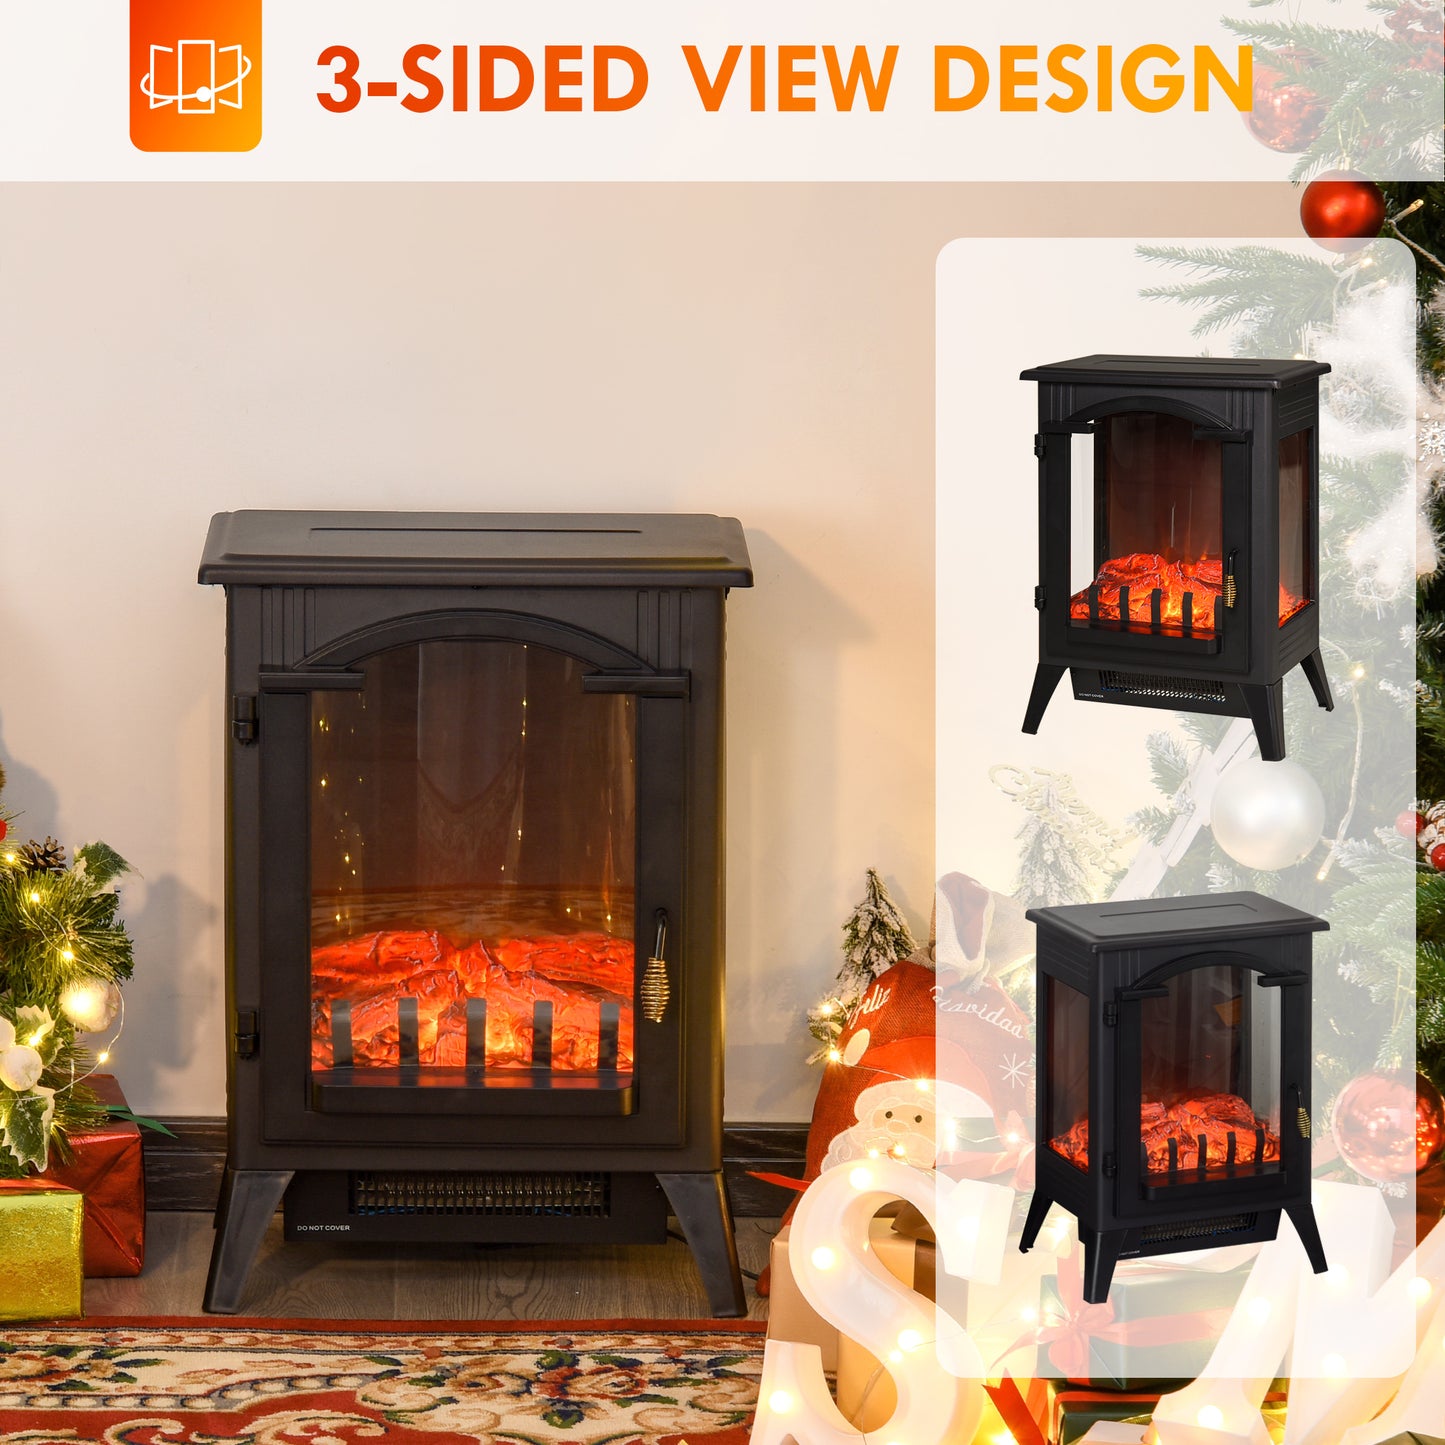 23 Black Electric Fireplace Heater with Realistic LED Flames and Overheating Protection